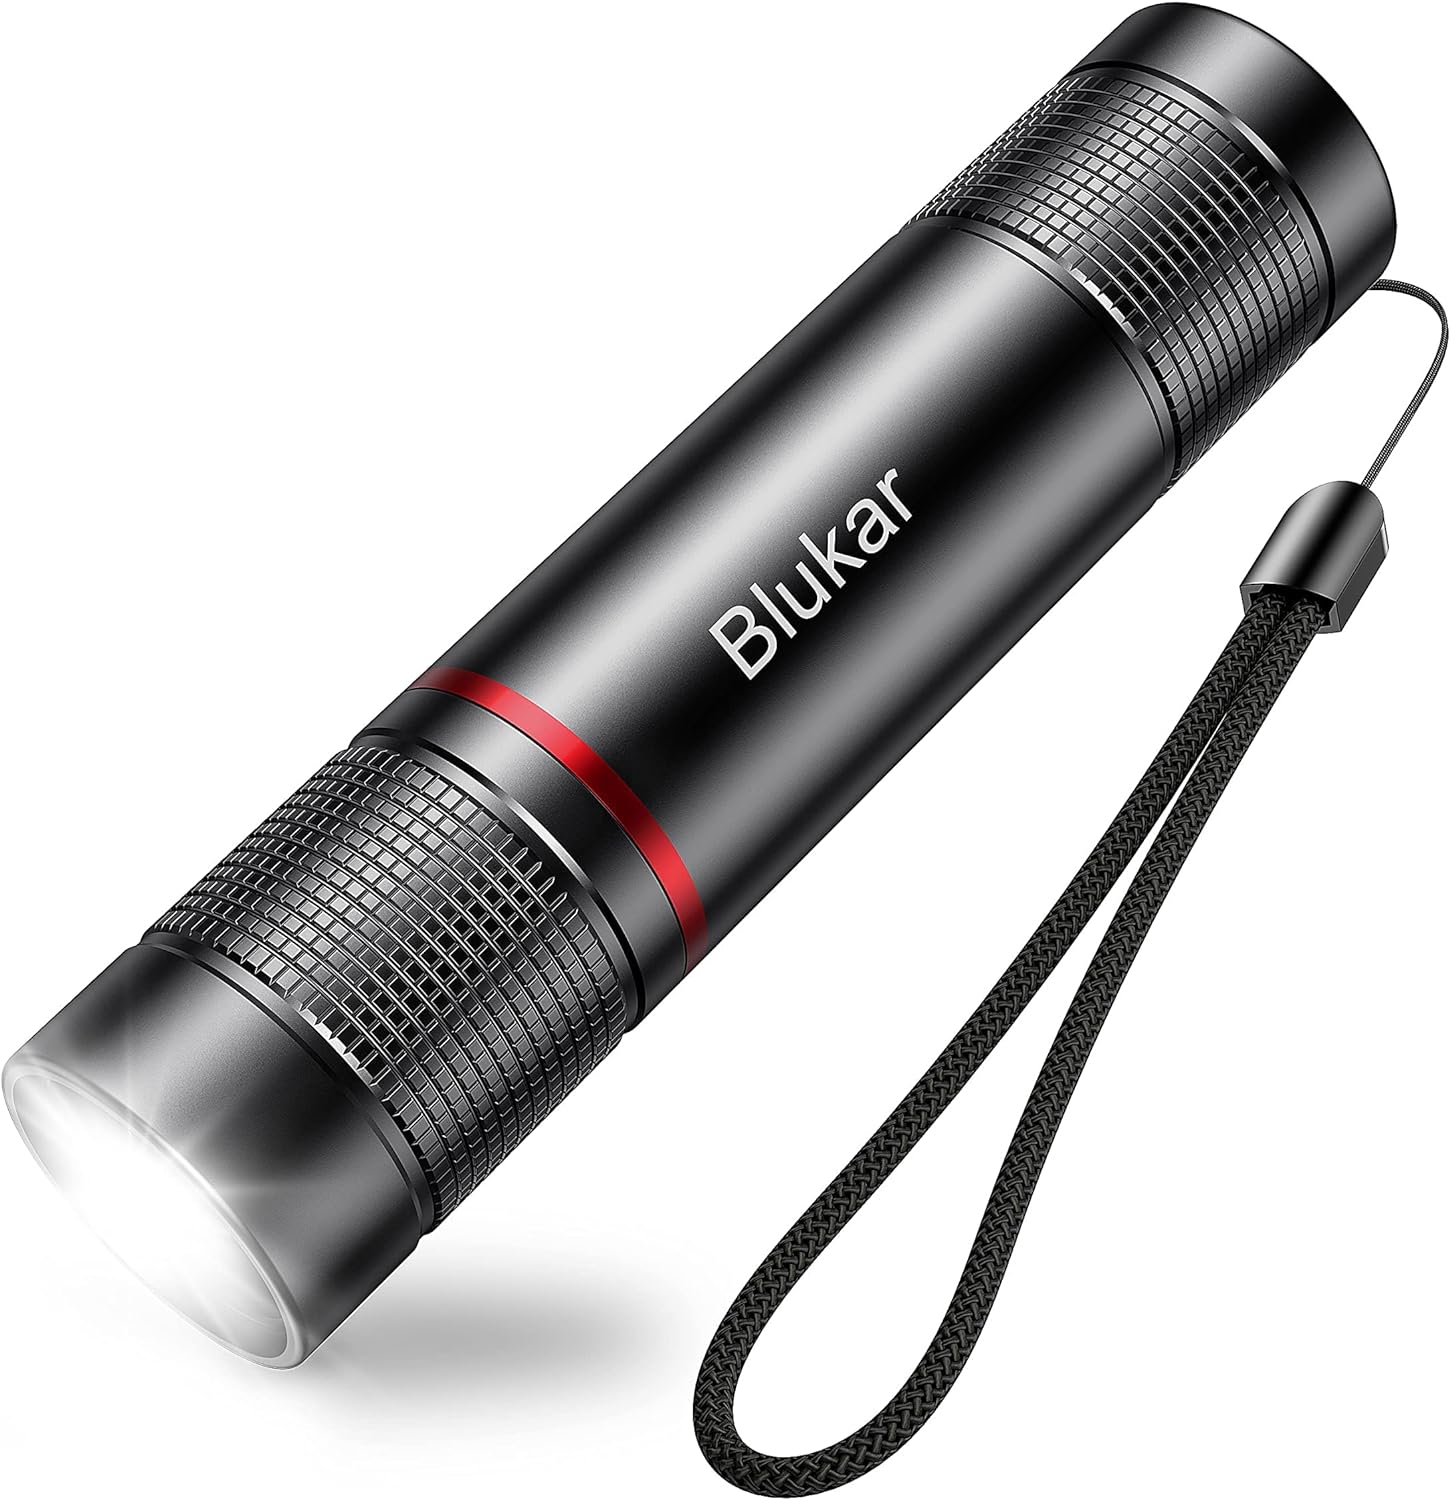 Blukar Waterproof Pocket Size LED Torch Rechargeable with Adjustable Focus Flashlight & 4 Lighting Modes